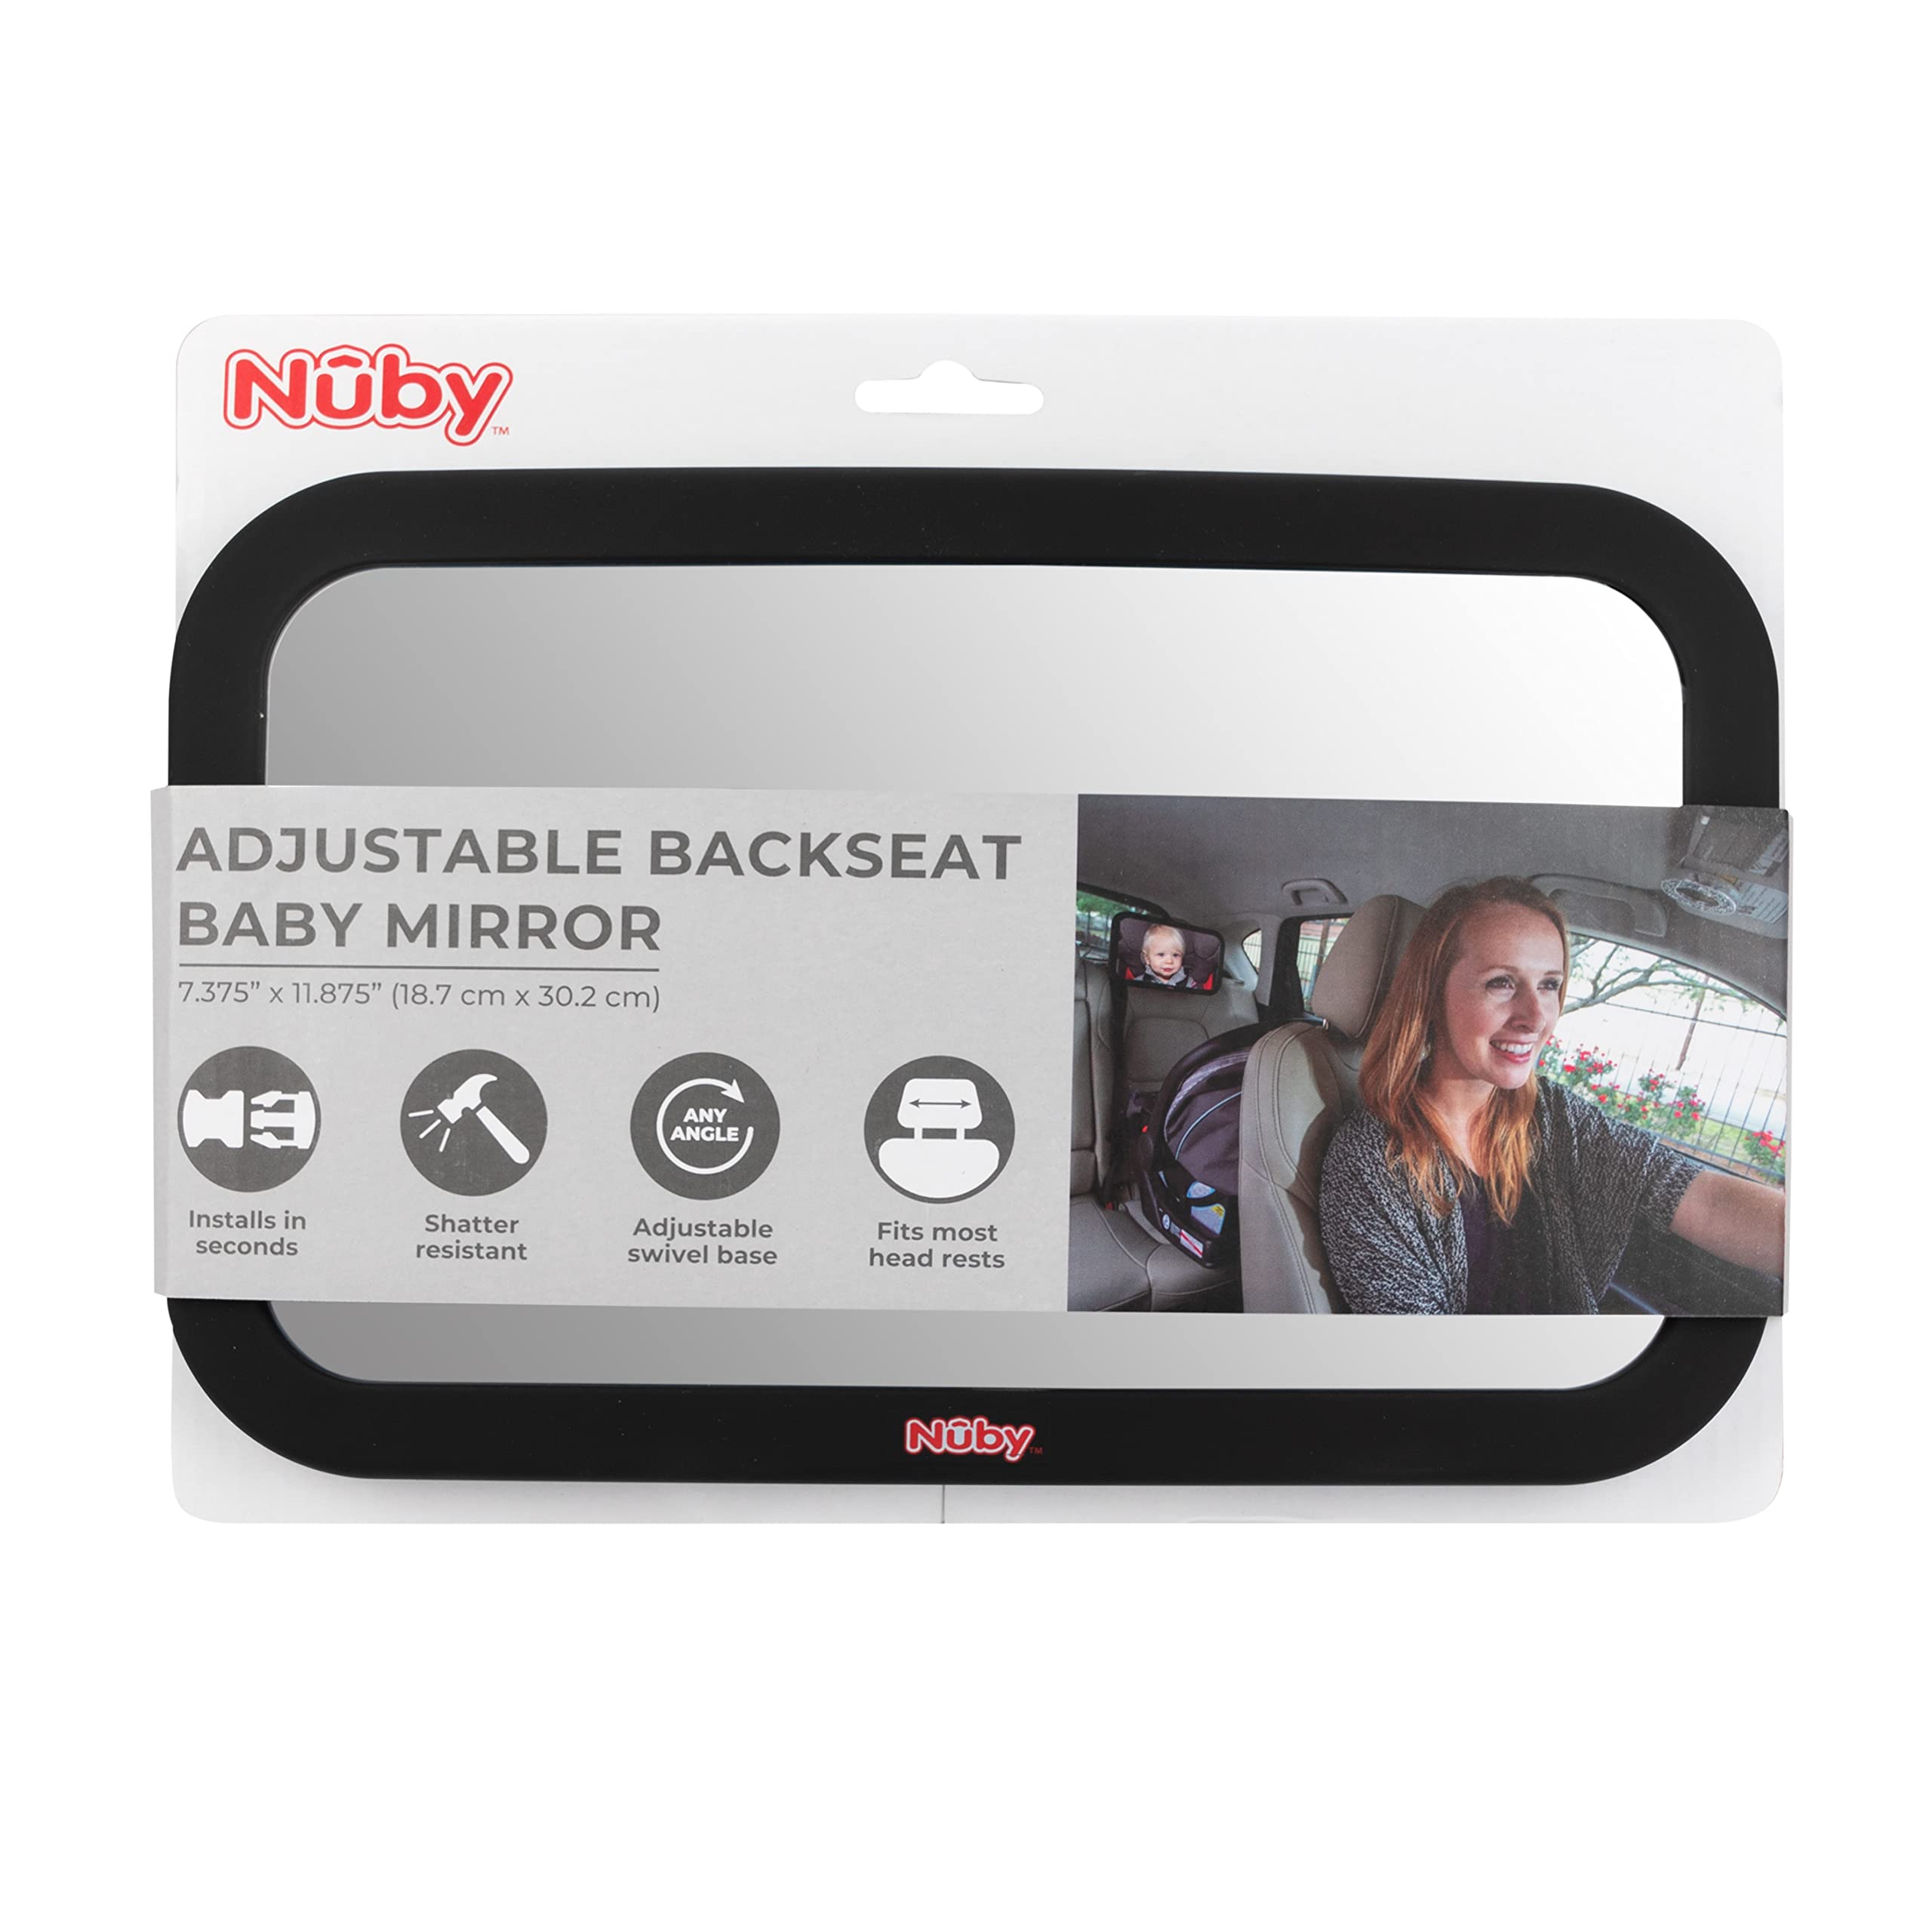 Nuby Adjustable Backseat Baby Mirror with Swivel Base for Easy Viewing, Quick Install, Shatter Resistant, Black